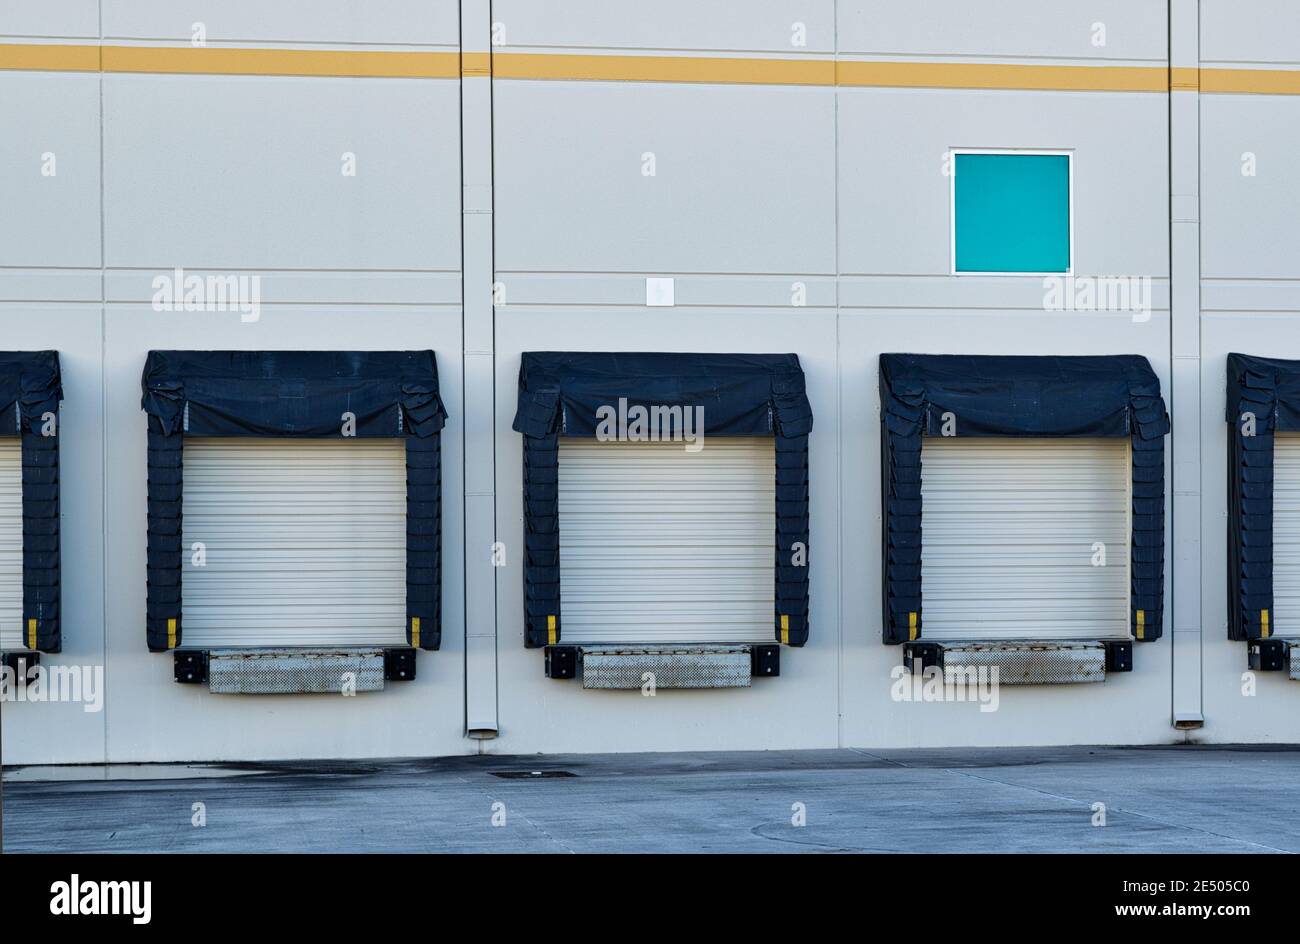 Loading dock doors at the back of a generic warehouse in an industrial district. Stock Photo